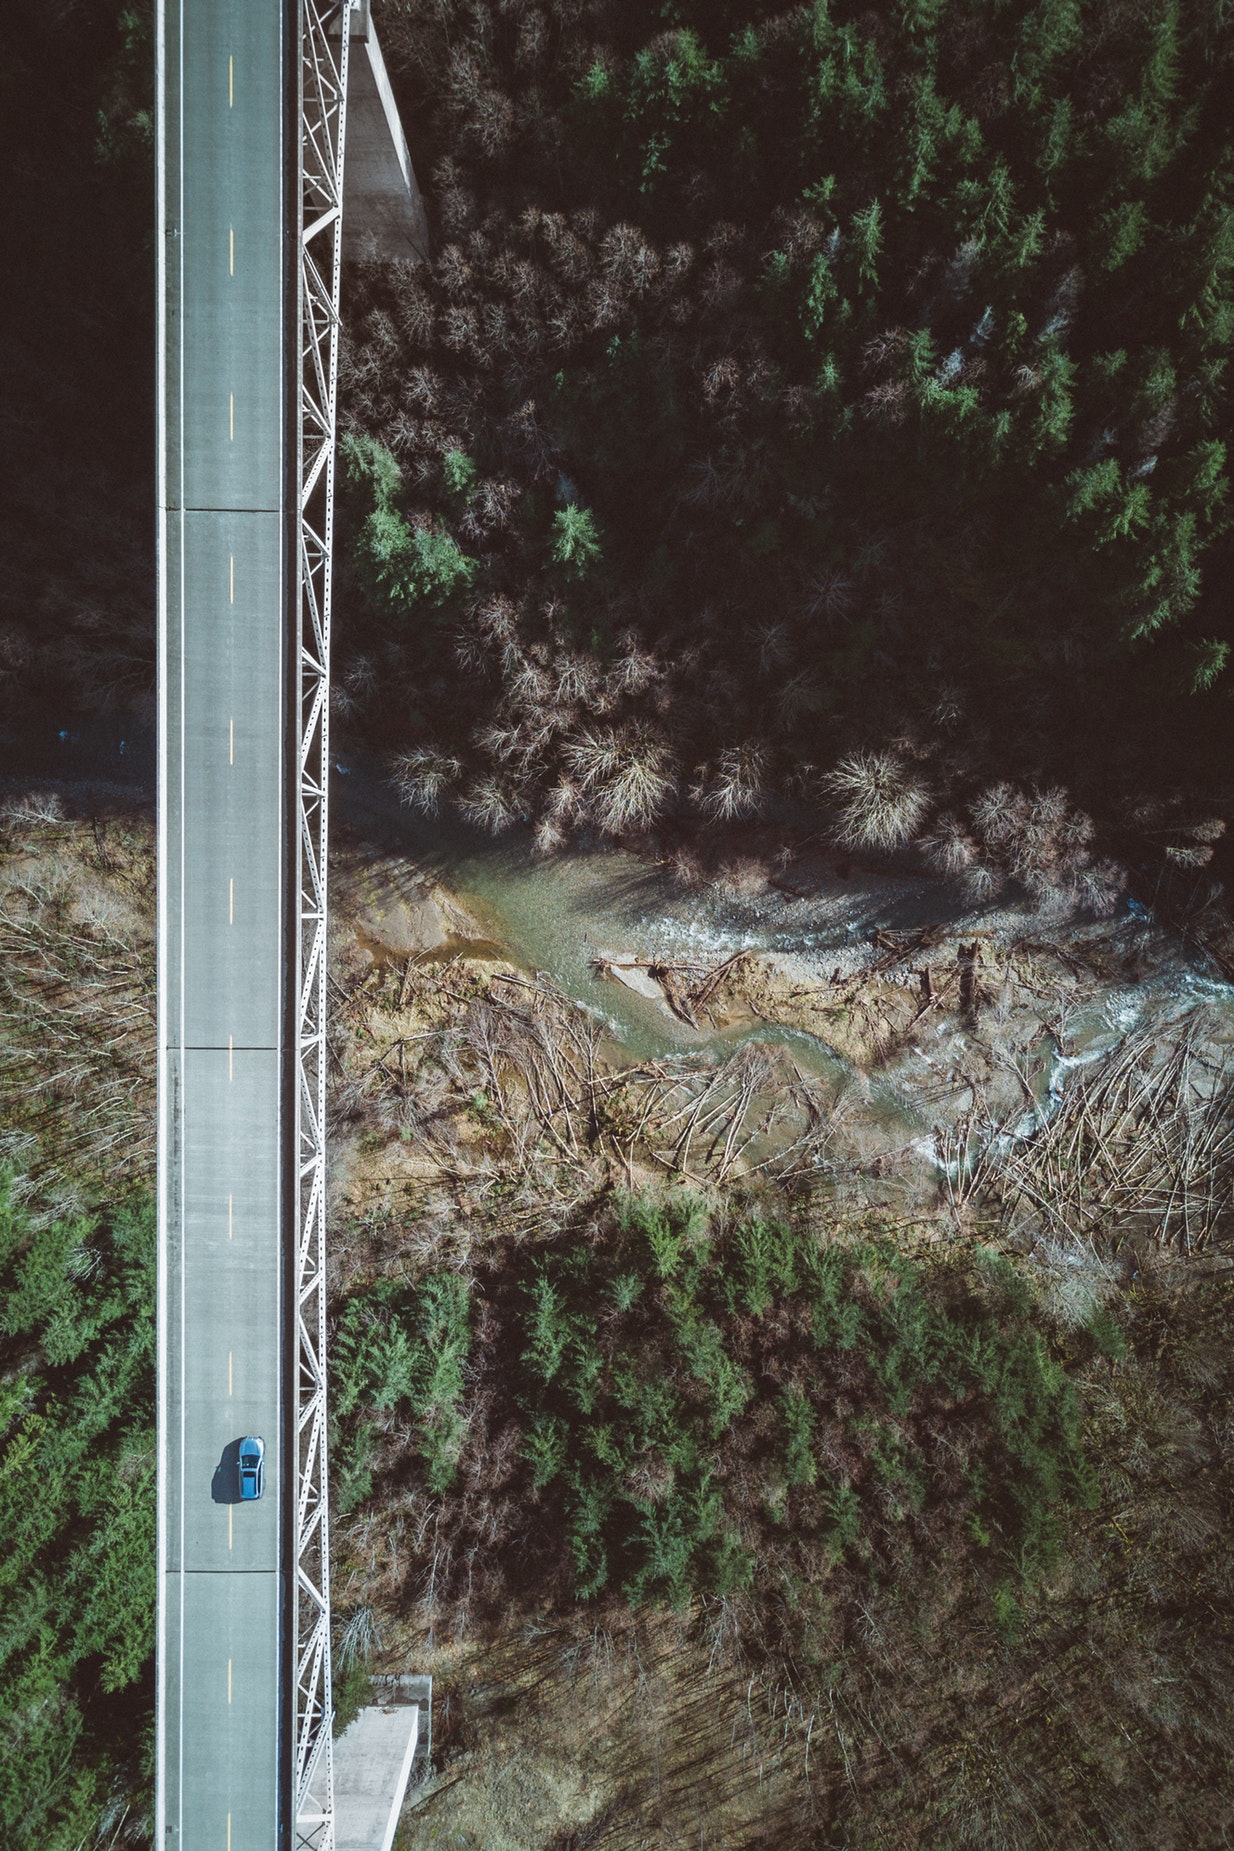 aerial view, Trees, Portrait display, Bridge, Dead trees, Forest, Water, Car, USA Wallpaper